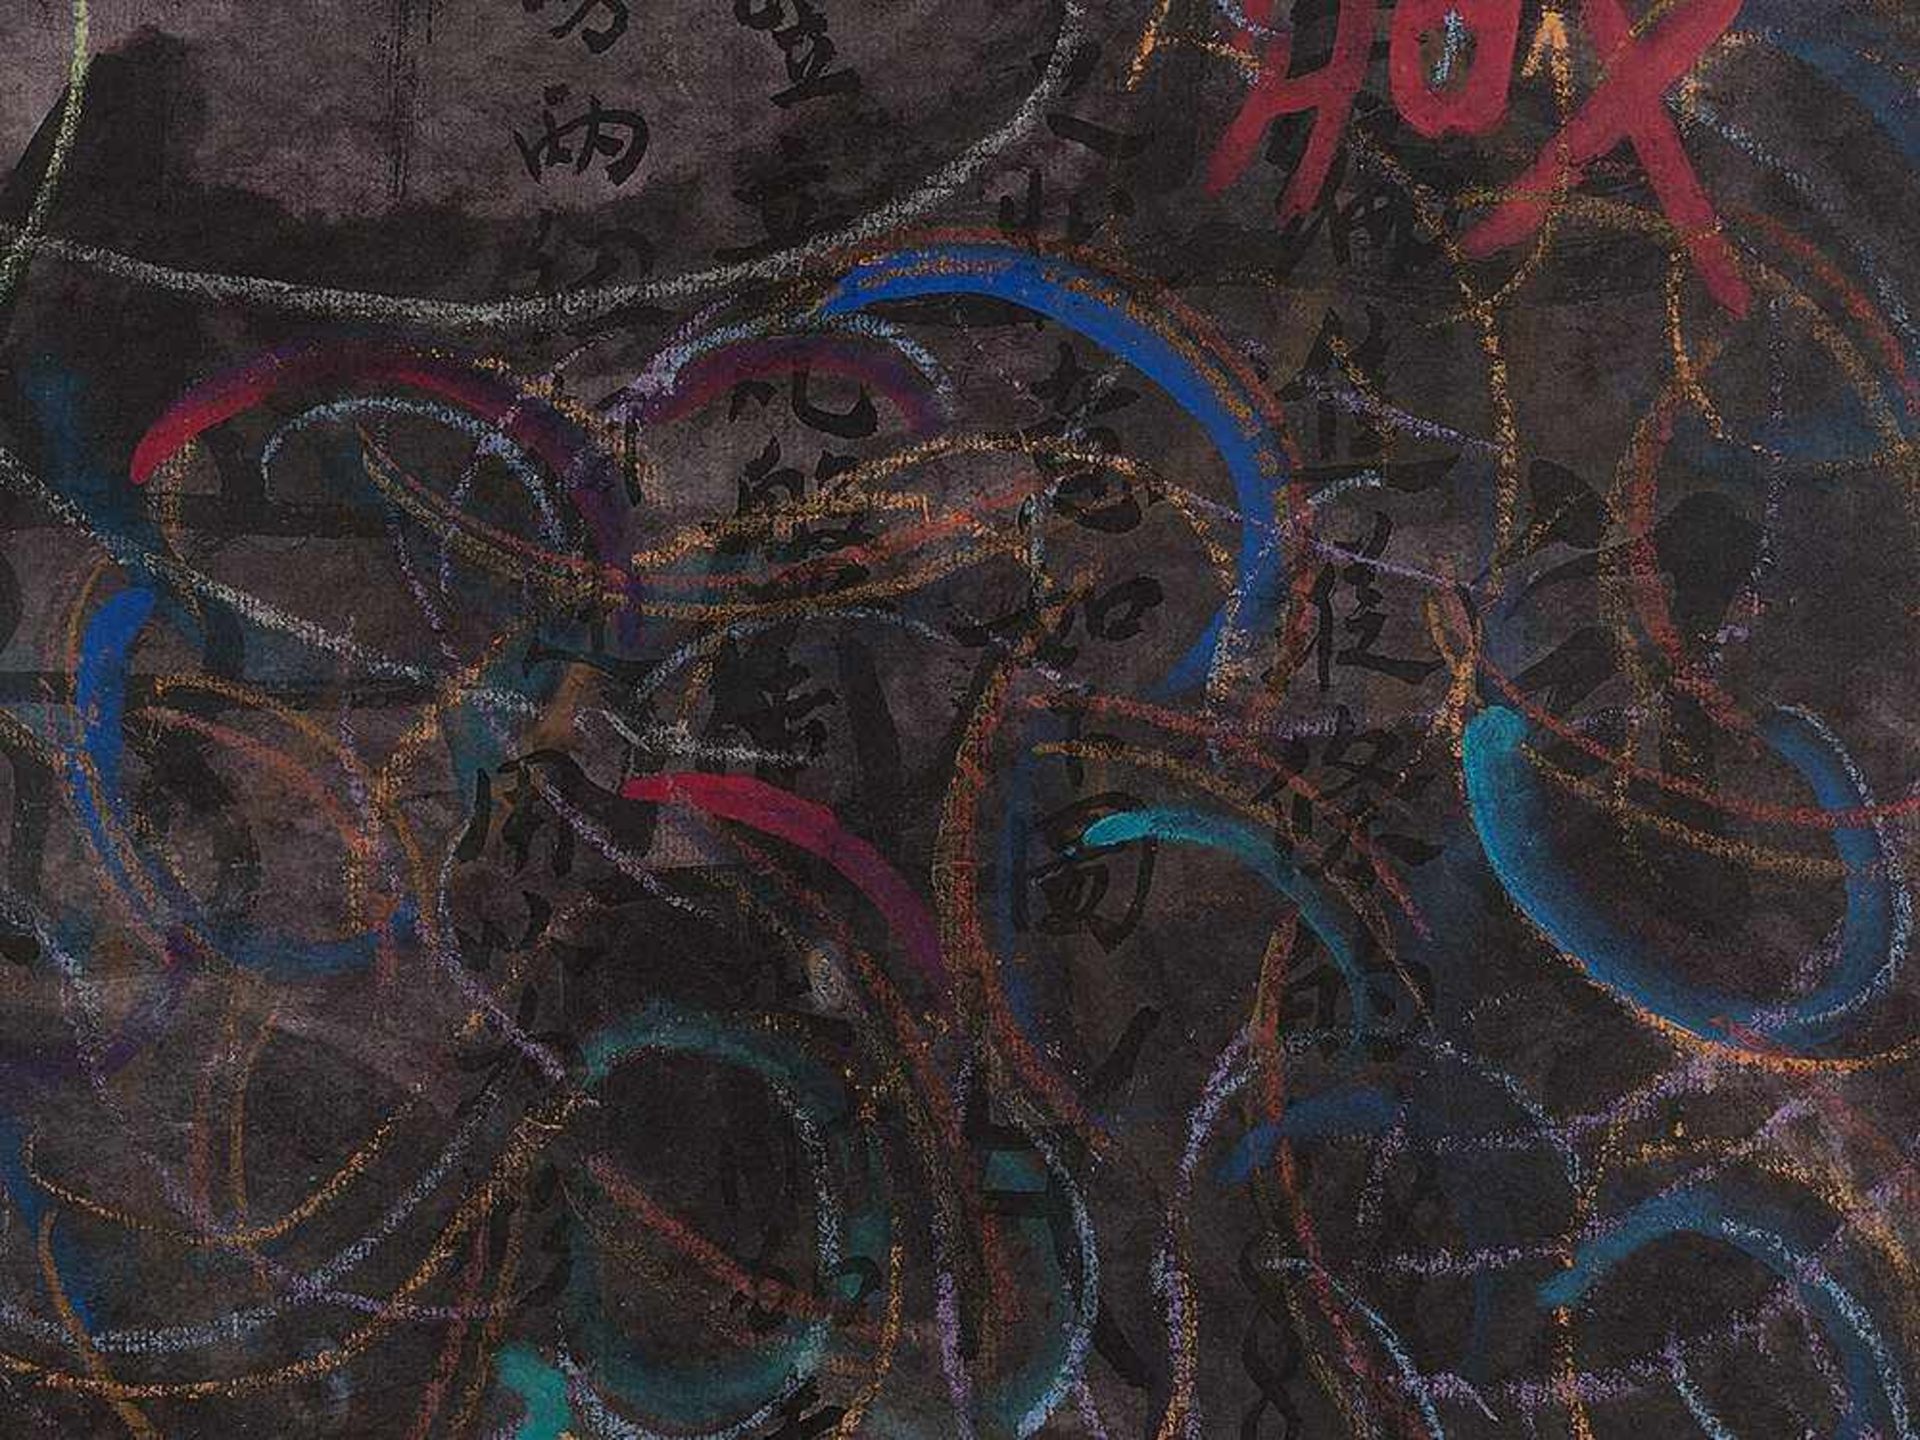 CHANG XIAOBING, PAINTING, CALLIGRAPHIC SIGNS Ink and colors on paper. China, 1991 This work by the - Image 6 of 8